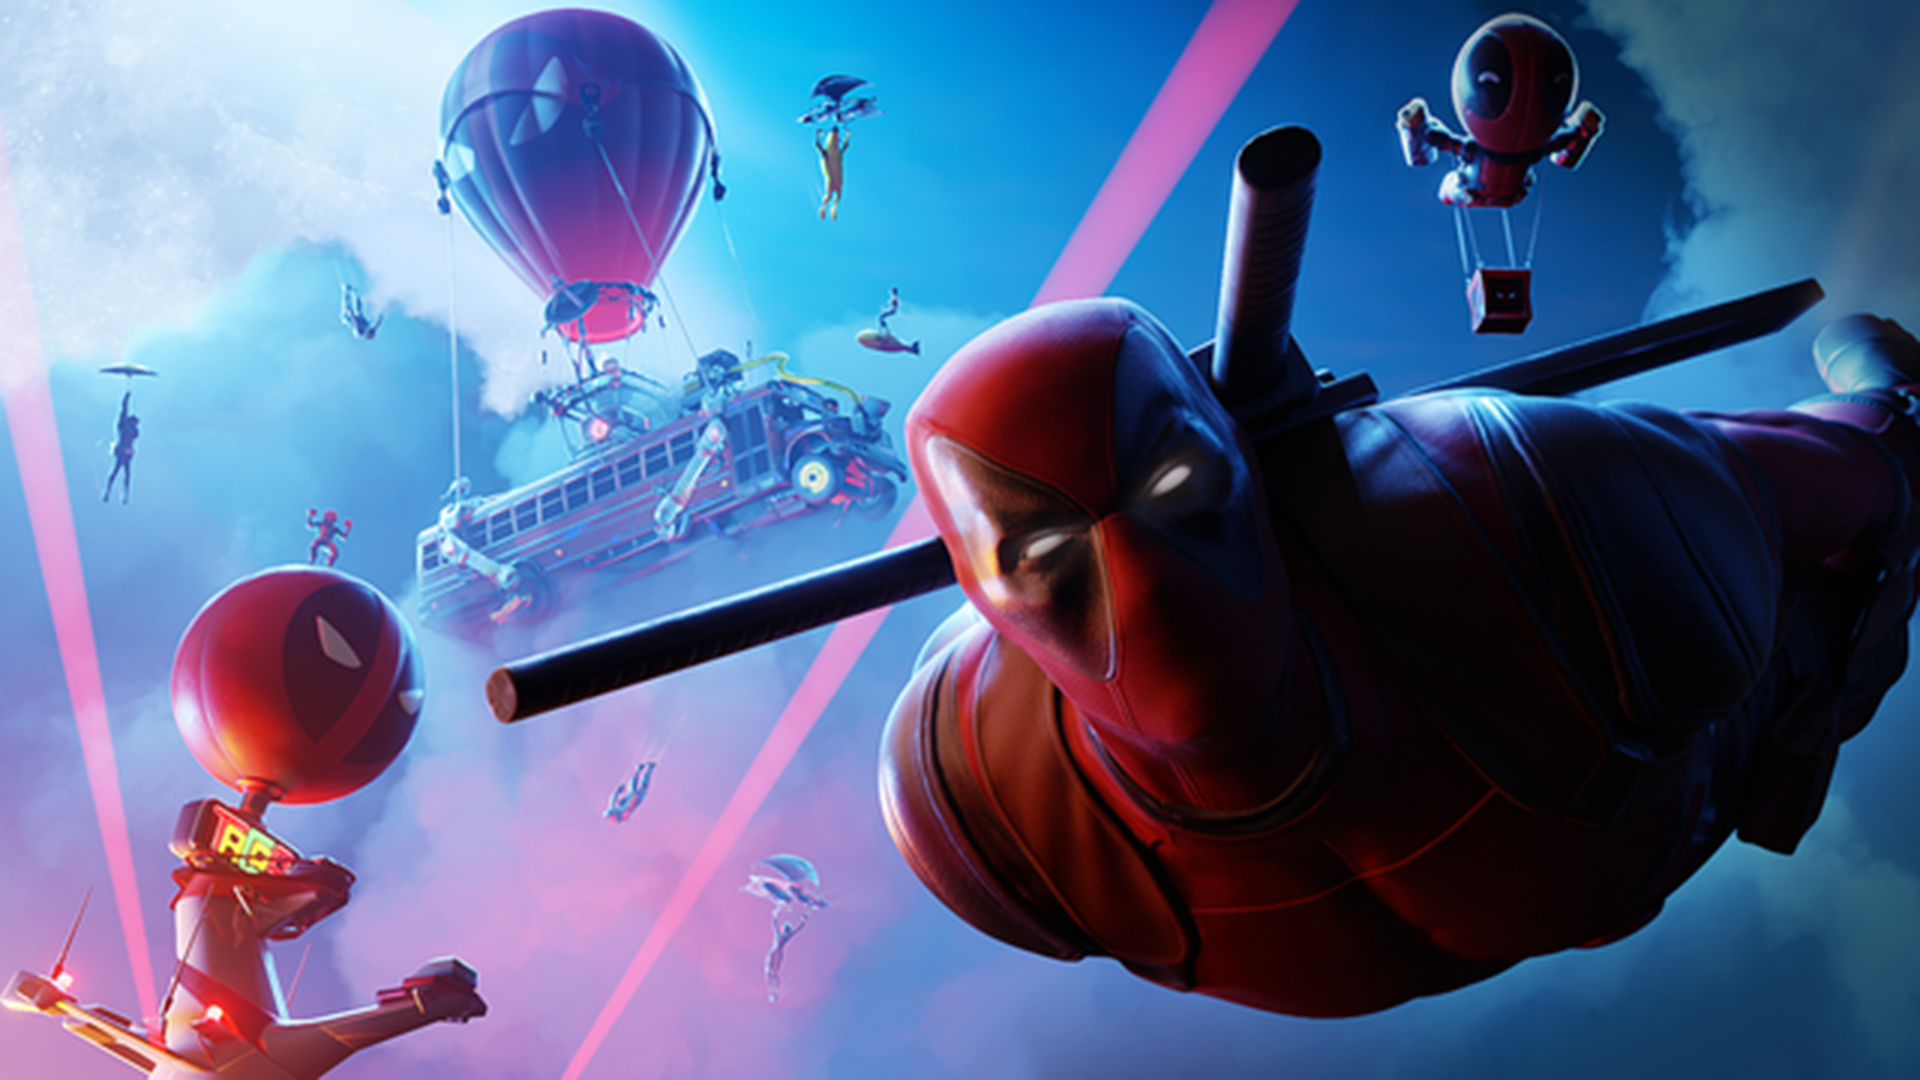 Fortnite Deadpool event: Yacht party, new items, challenges